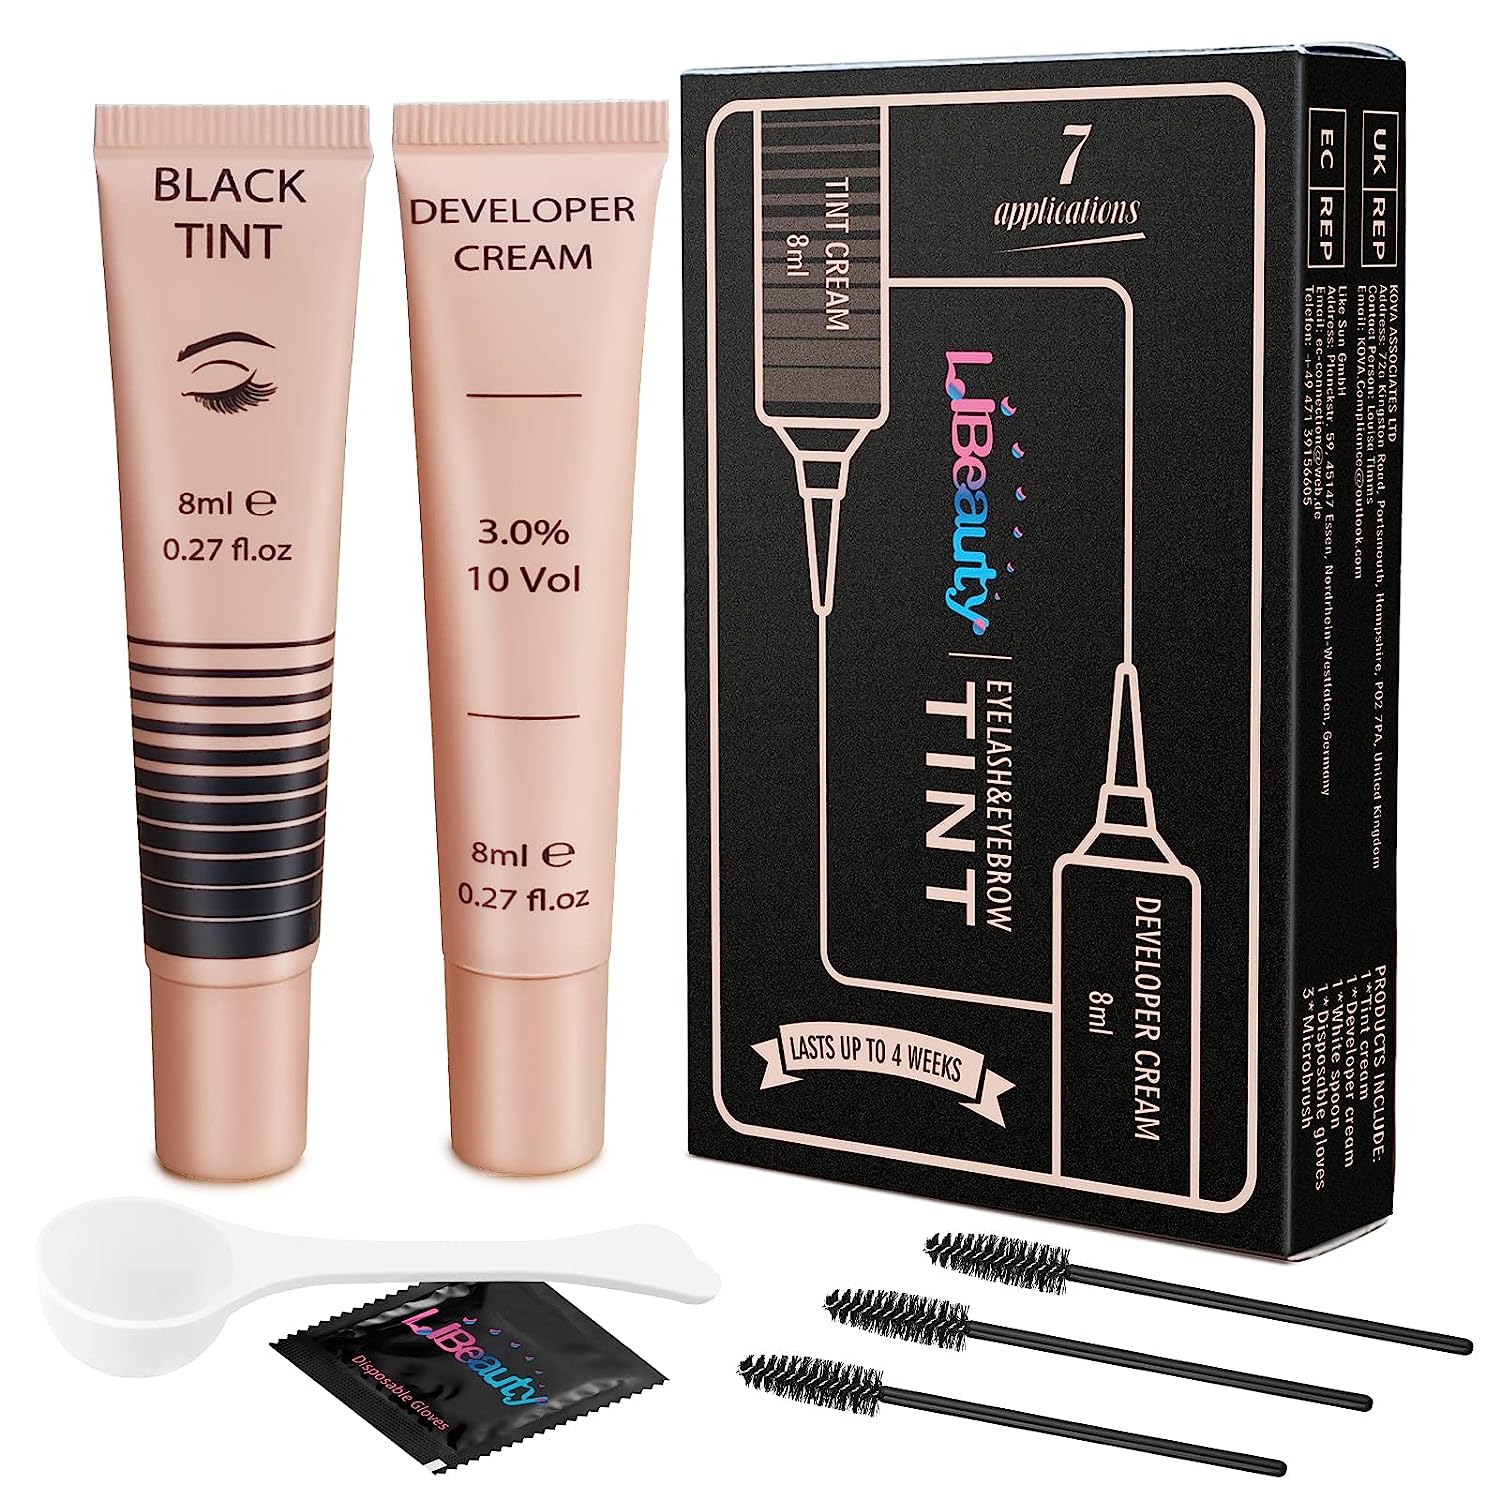 Libeauty lash tint Black Kit-Black Eyelash Tint 2-in-1 Eyelashes and Eyebrow Dye Set, Lasts up to 6 Weeks, Quick and Easy to use, semi-permanent Black Color With Developer